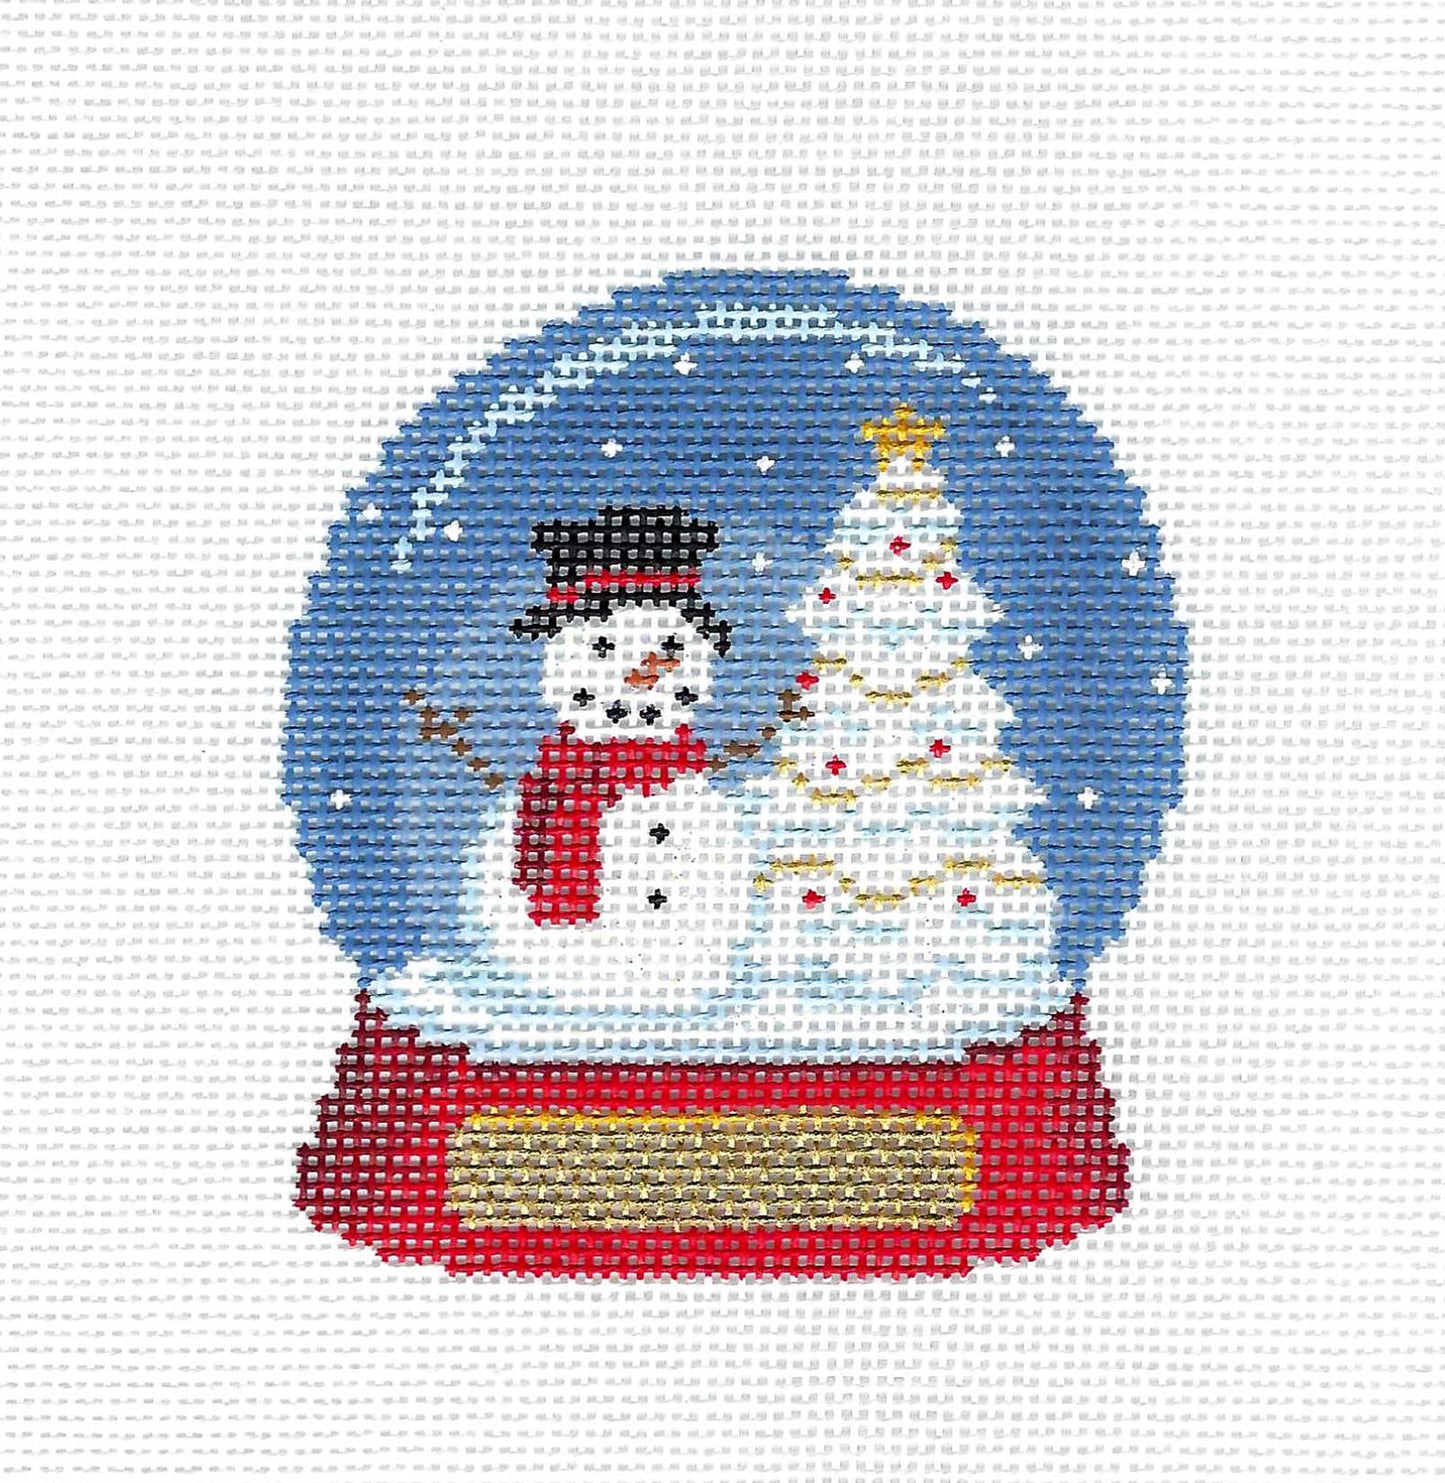 Snow Globe Christmas ~ Snowman and Tree SNOW GLOBE handpainted Needlepoint Canvas Ornament by Susan Roberts